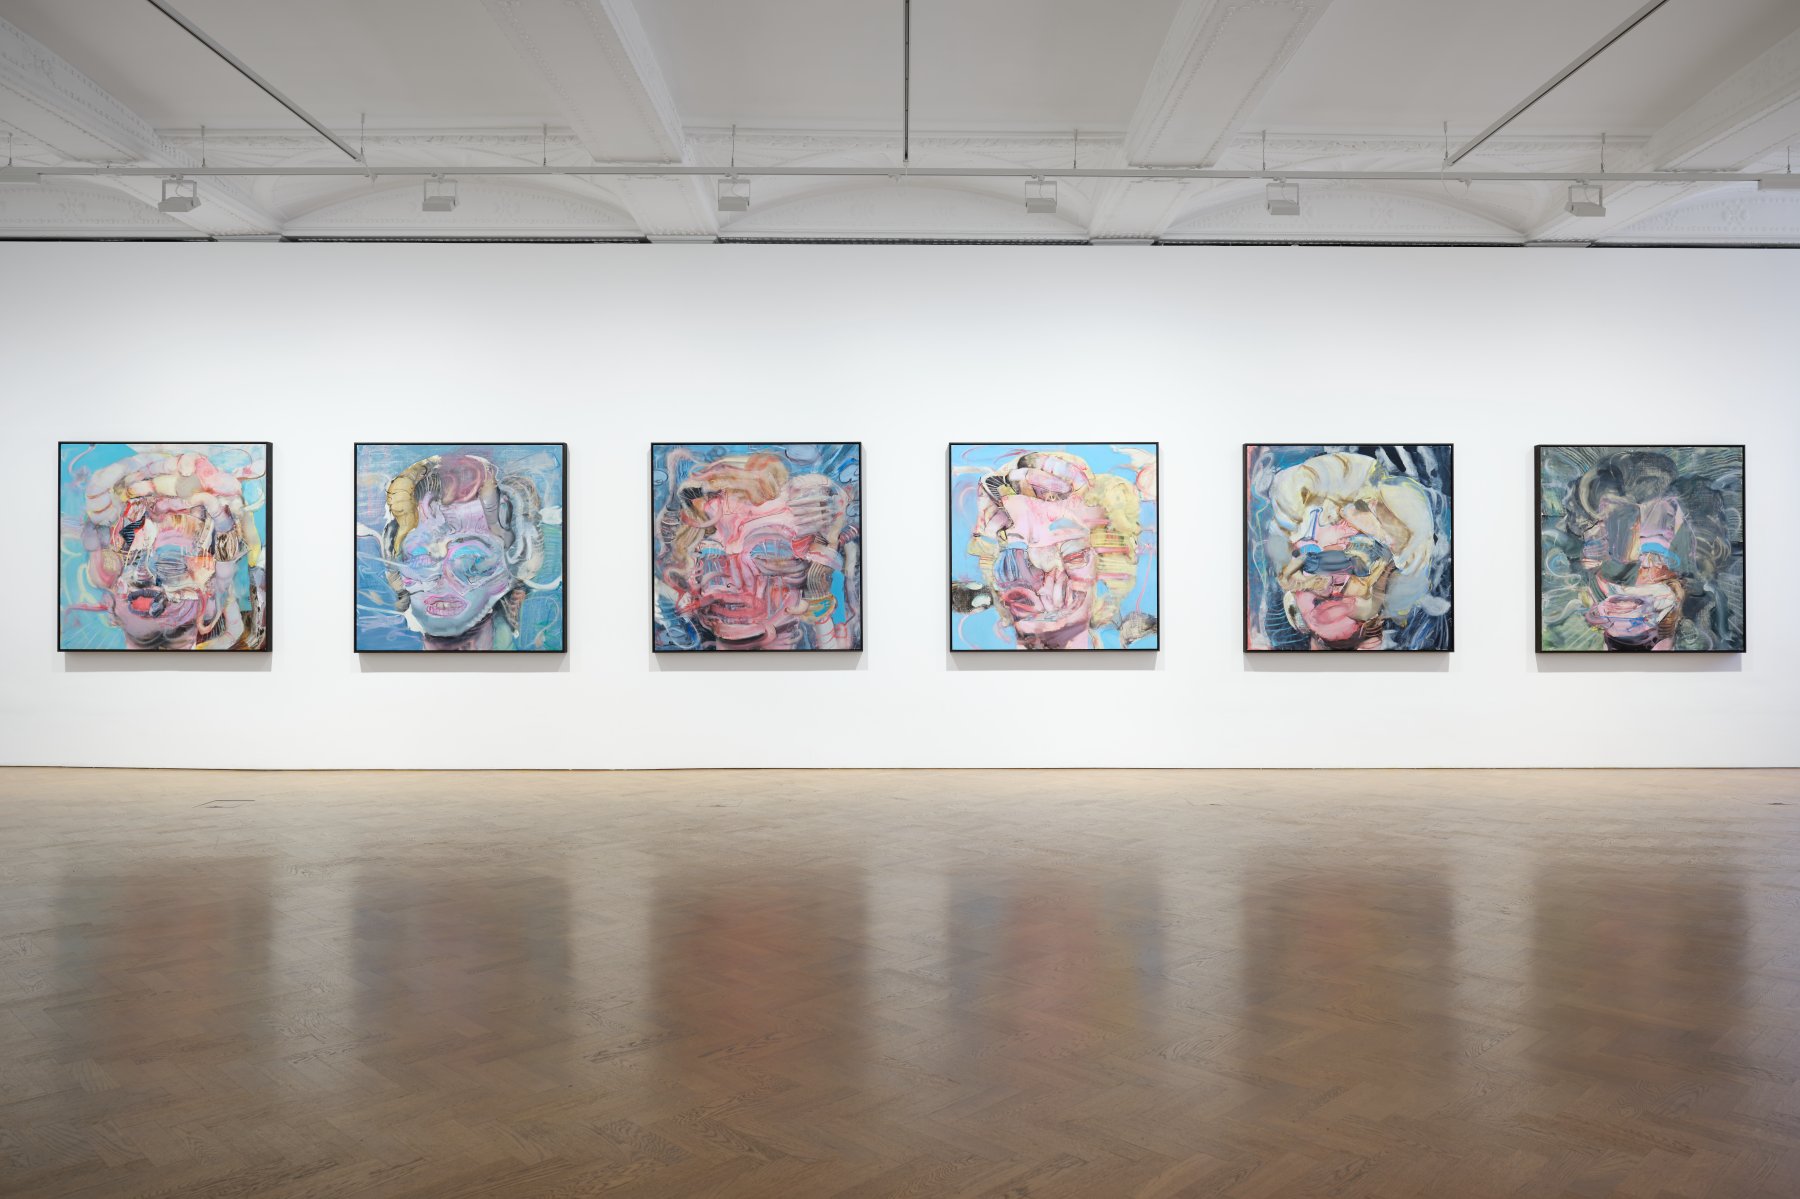 Installation image for Adrian Ghenie: The Fear of NOW, at Thaddaeus Ropac